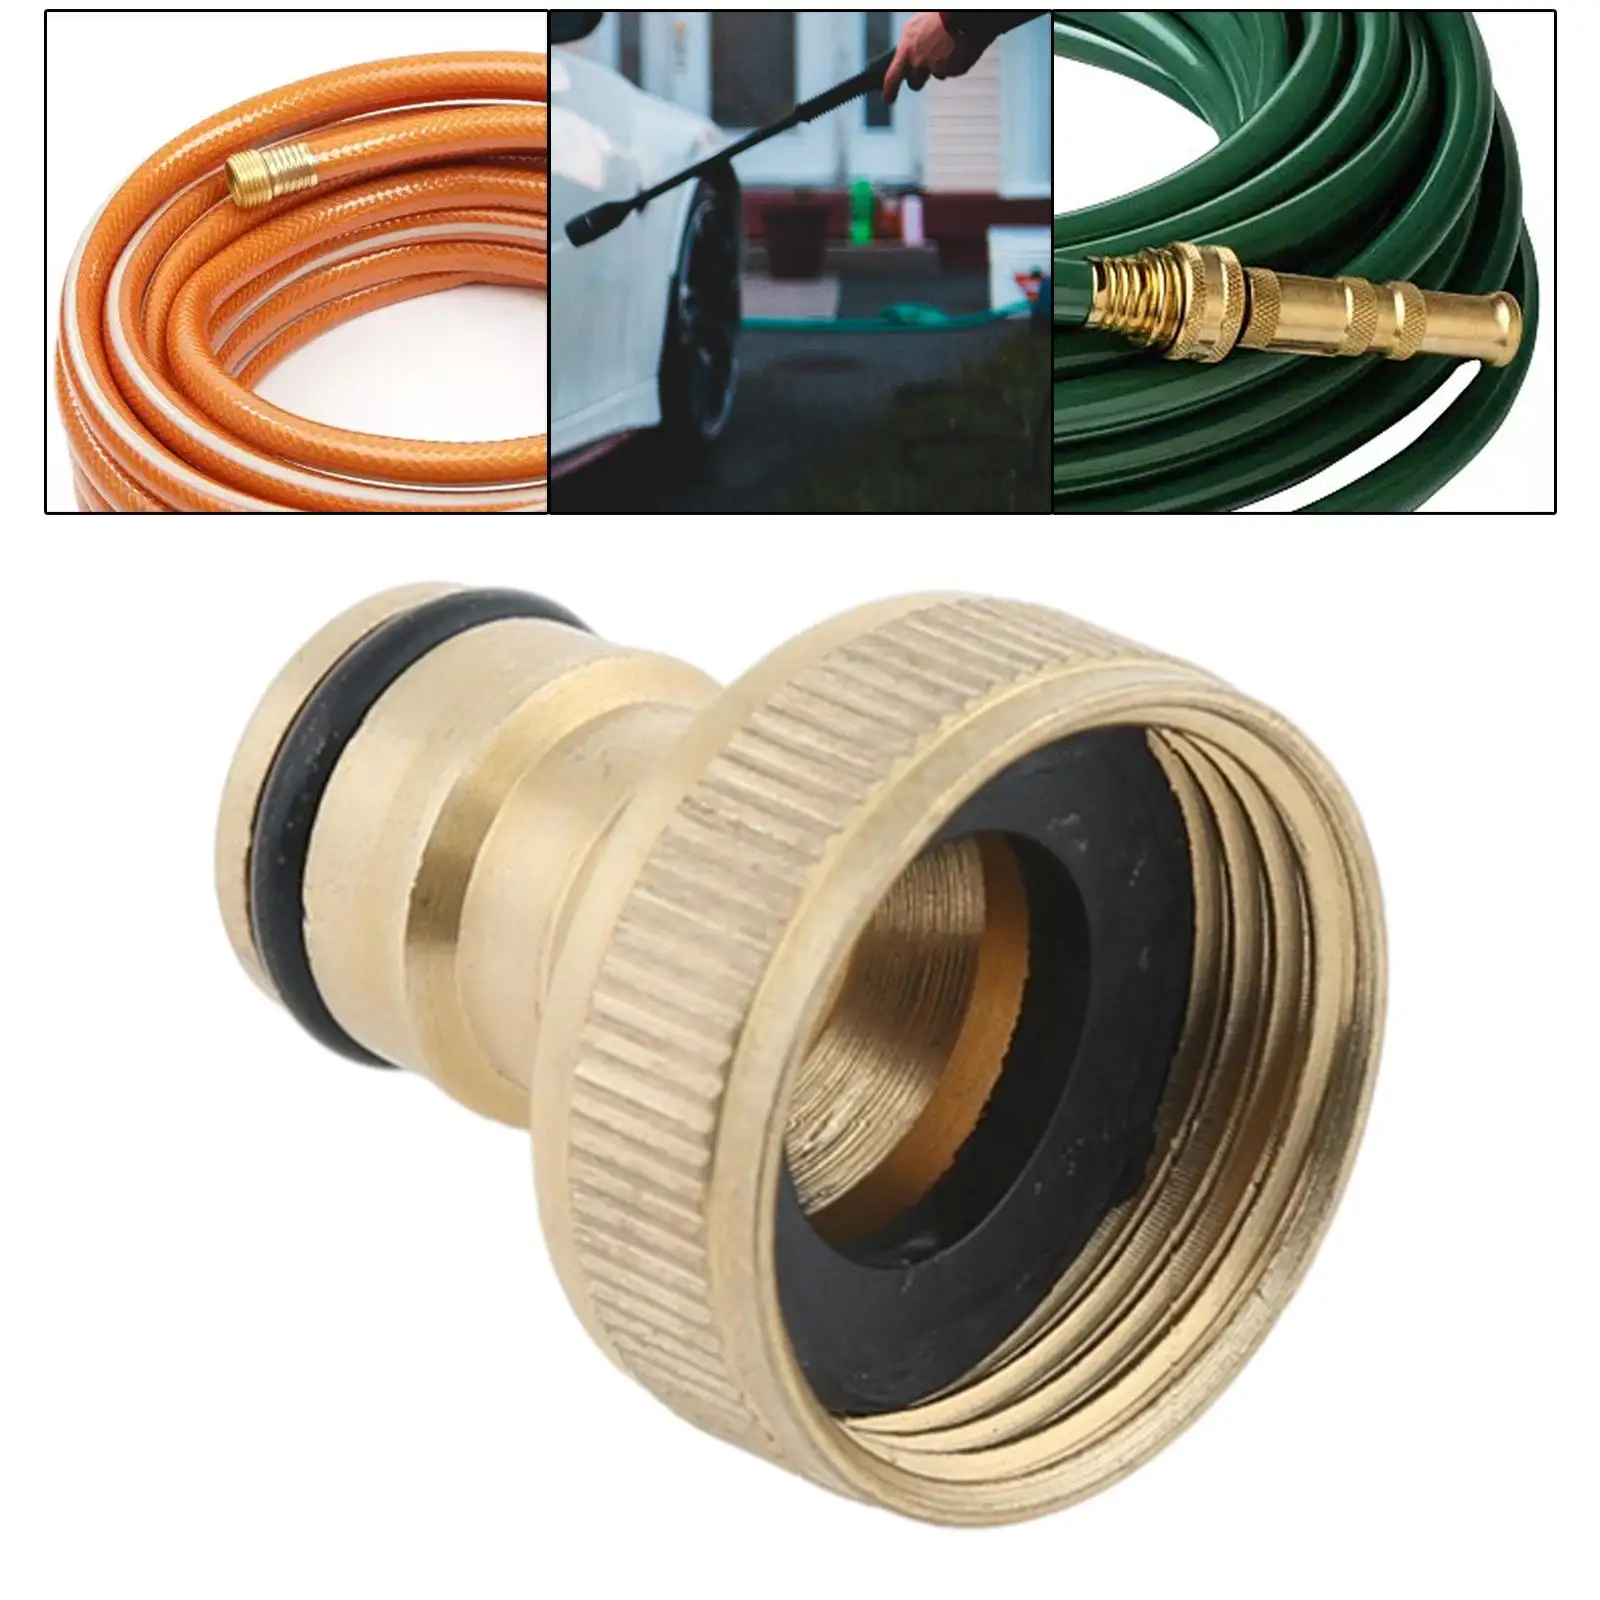 Solid Brass Hose Connector Fittings Quick Connect 6cm Repair High Pressure Washer Quick Connector for Garden Hose Accessory